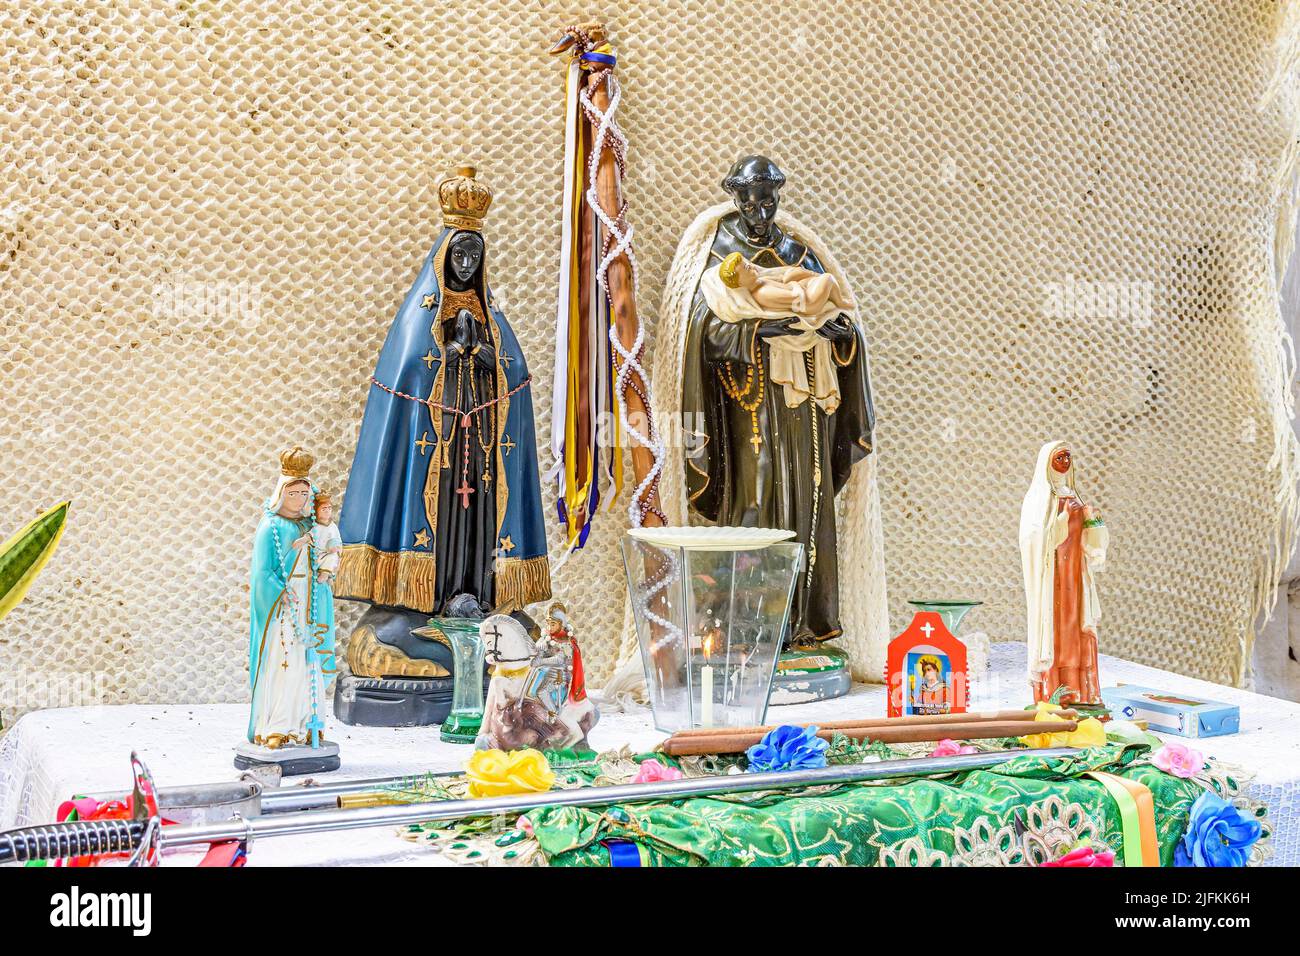 Brazilian religious altar mixing elements of umbanda, candomblé and catholicism in the syncretism present in the local culture and religion. Stock Photo